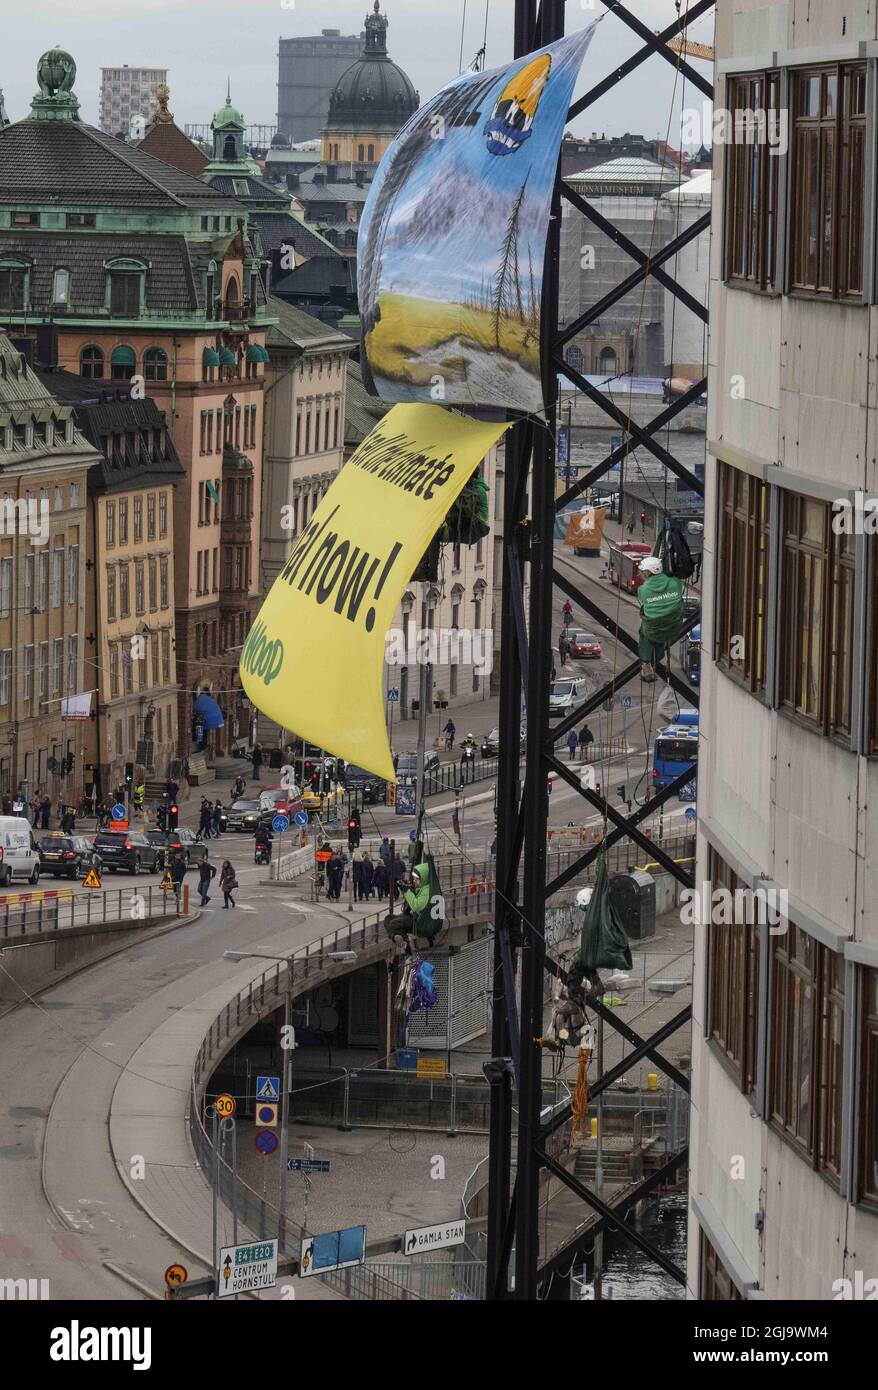 STOCKHOLM 2016-04-27 German activist are seen protesting against the Swedish company VattenfallÃ‚Â´s coal mines in Germany in Stockholm, Sweden, April 27, 2016. Foto Leif Blom / TT-Bild code 50080 pollution, environment, protest, demonstration, protesters,industri,politics, economy  Stock Photo